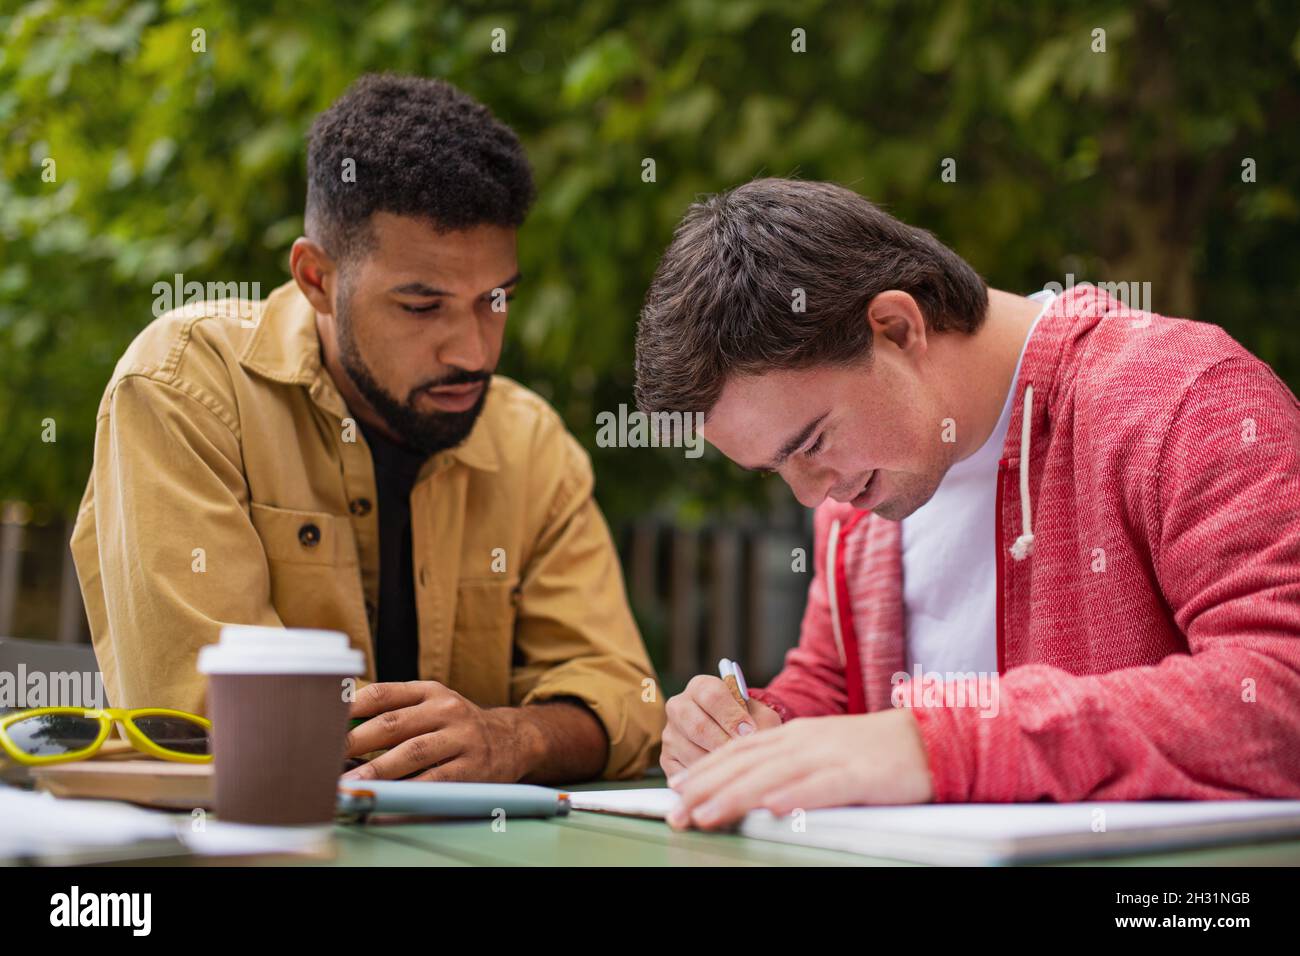 Young man with Down syndrome with his mentoring friend sitting outdoors in cafe and studying. Stock Photo